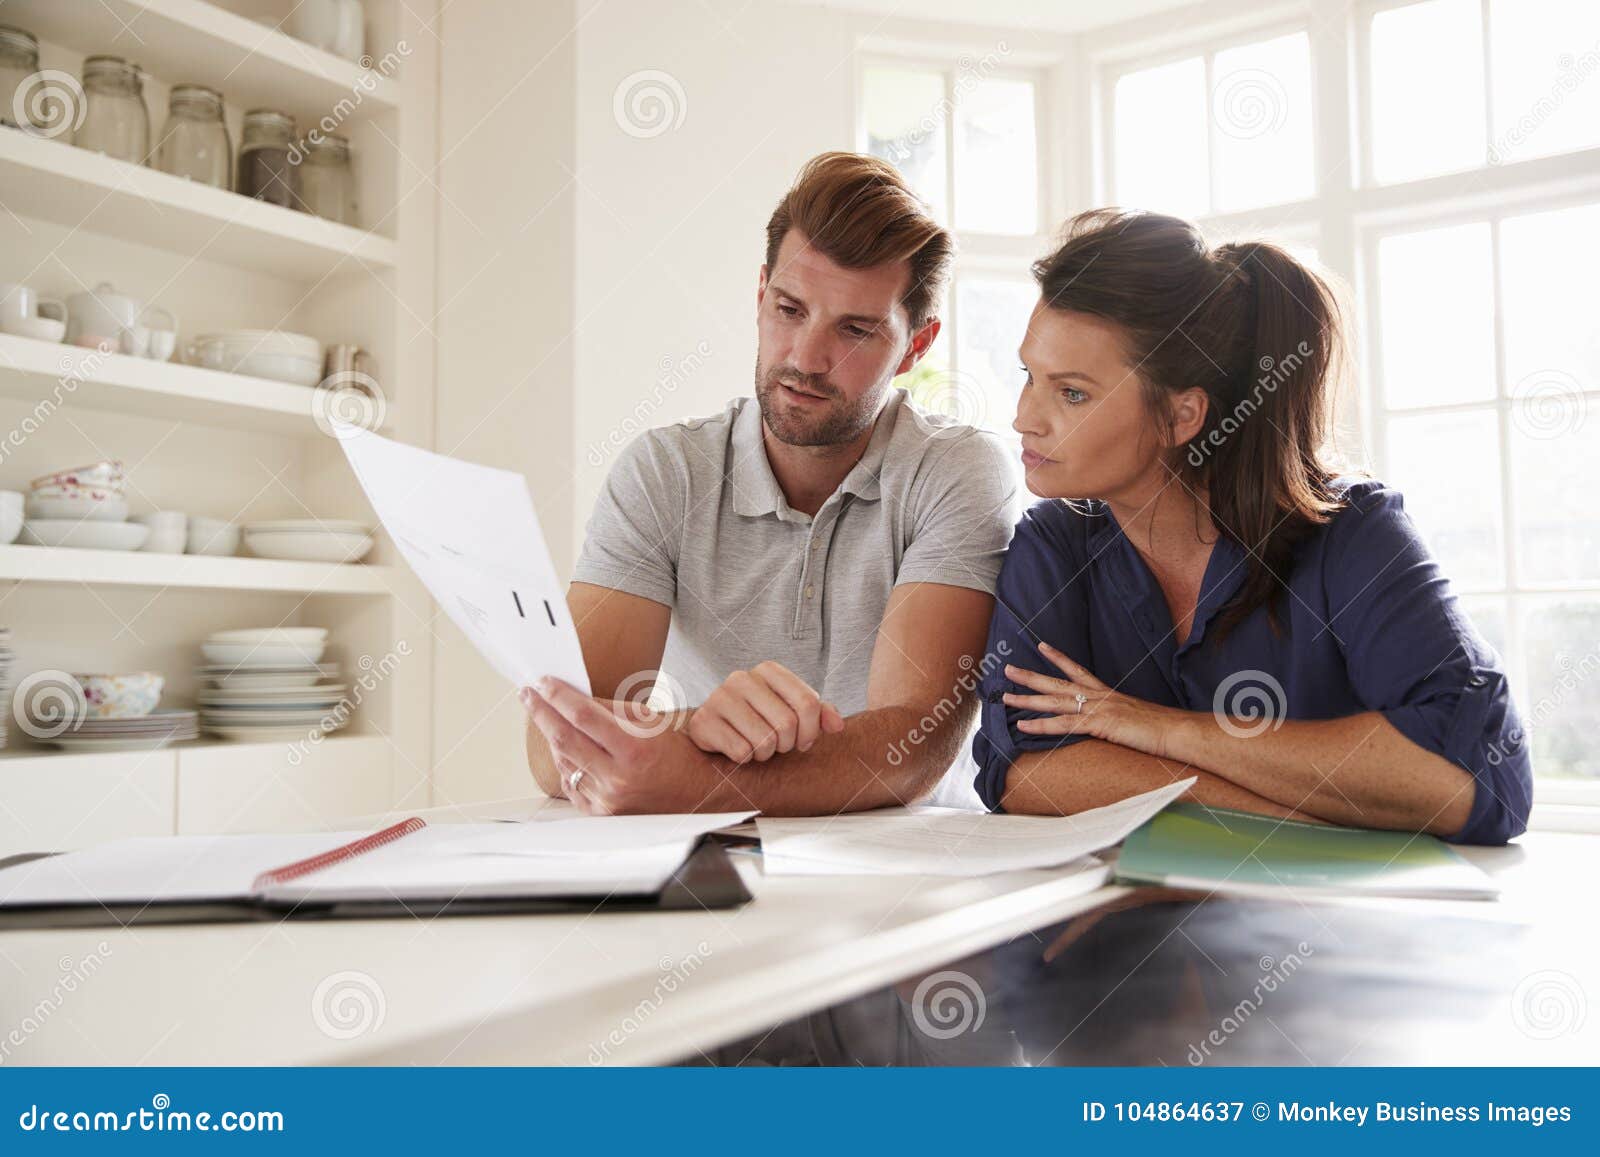 couple looking at domestic finances at home together